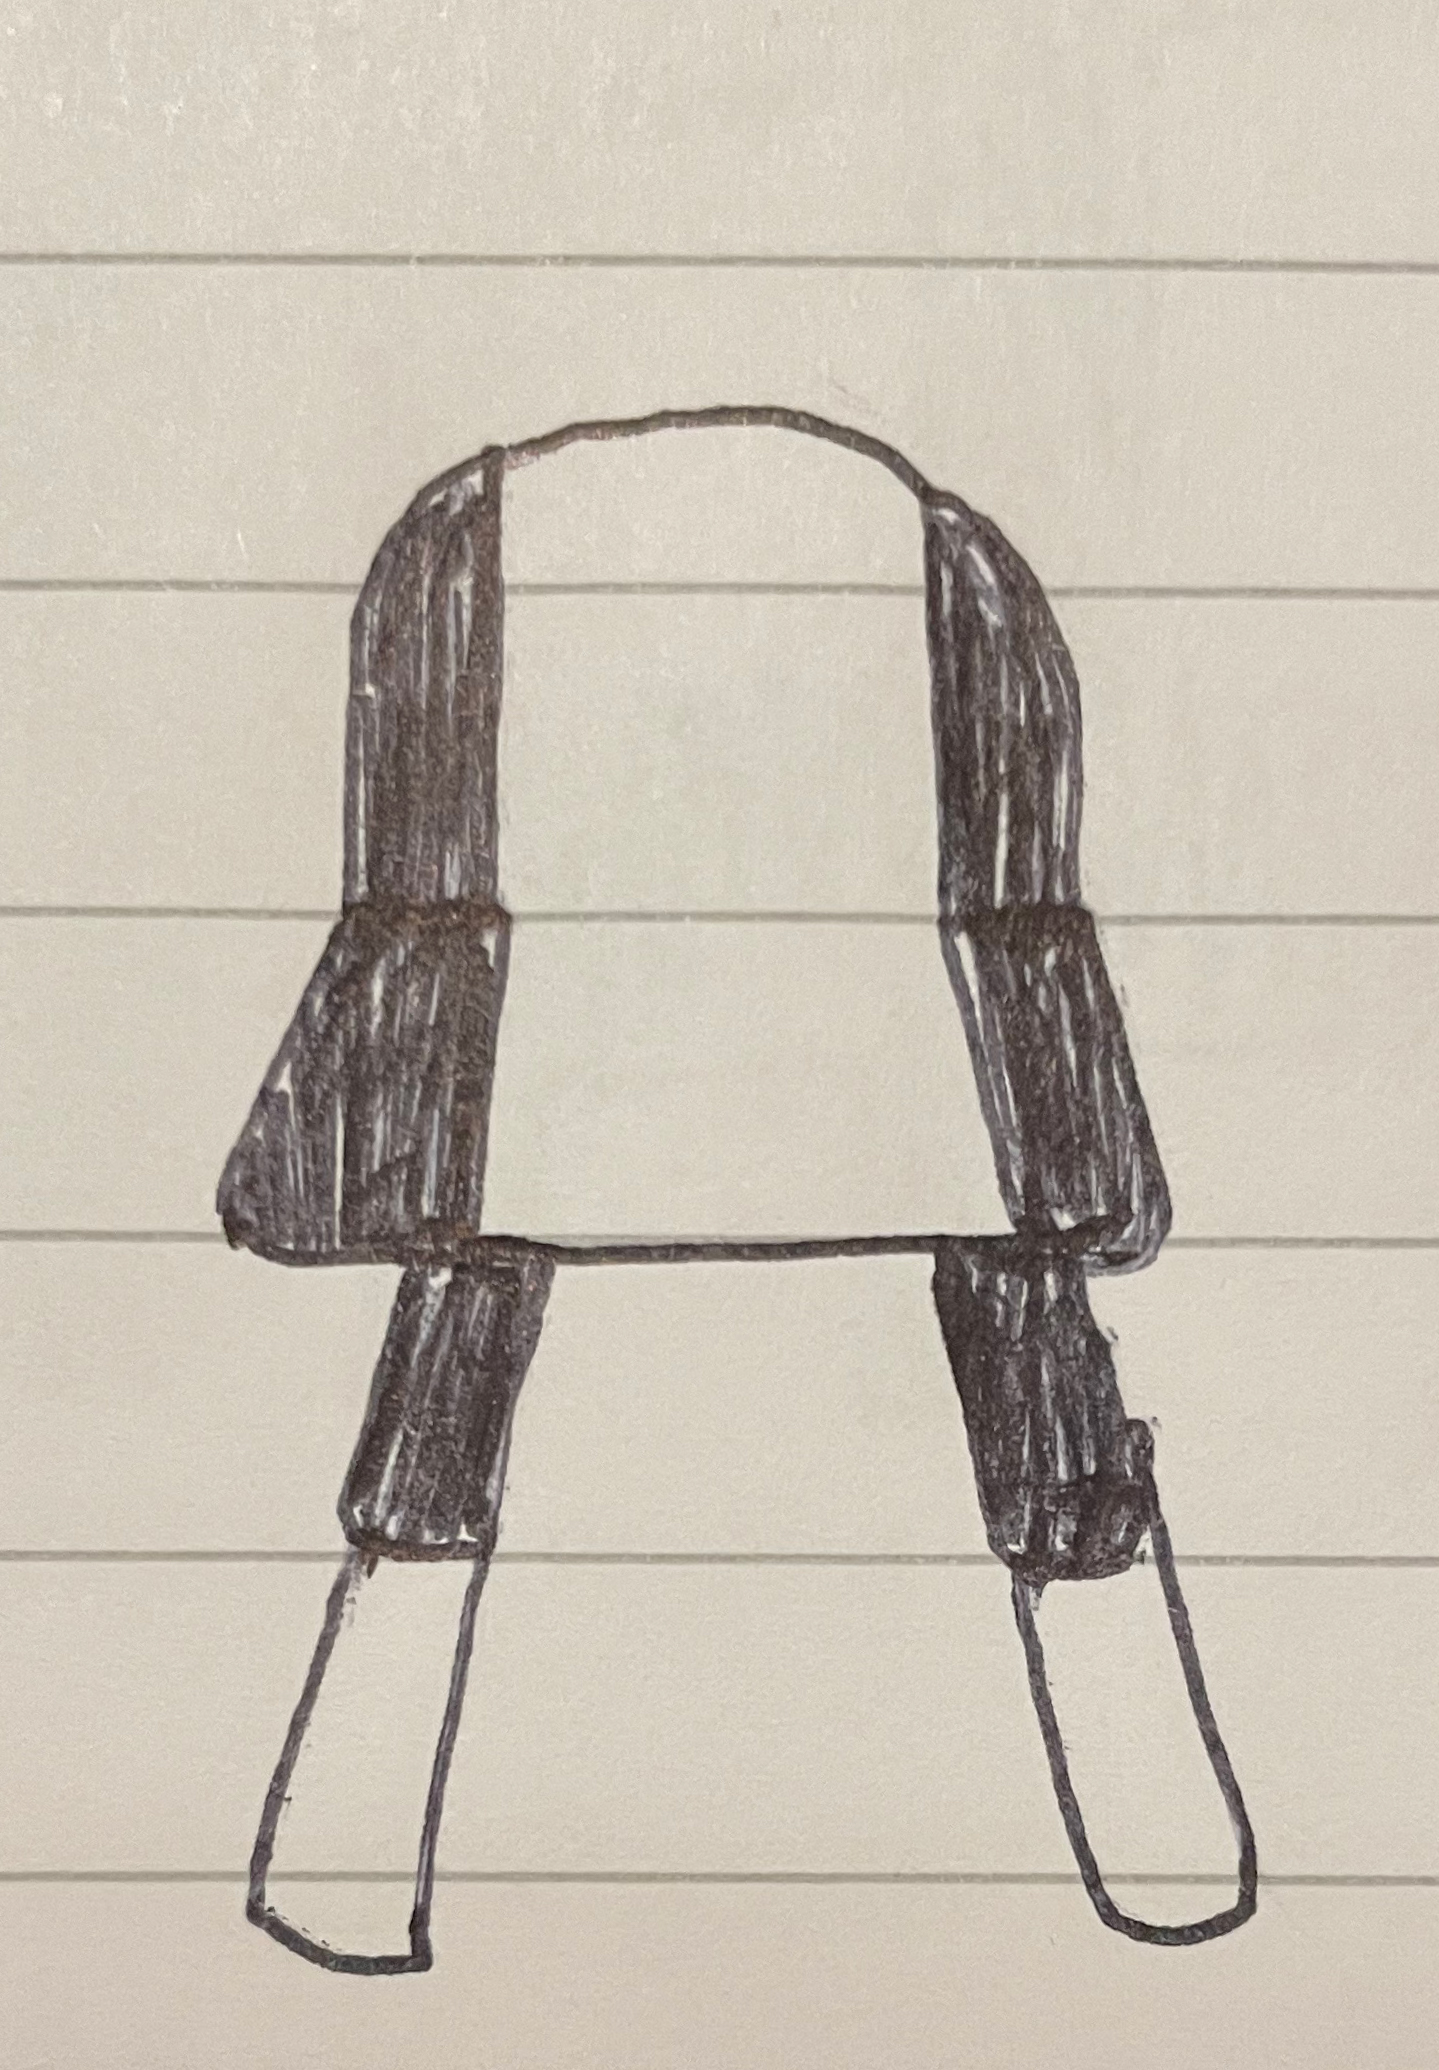 small chair drawn in pencil